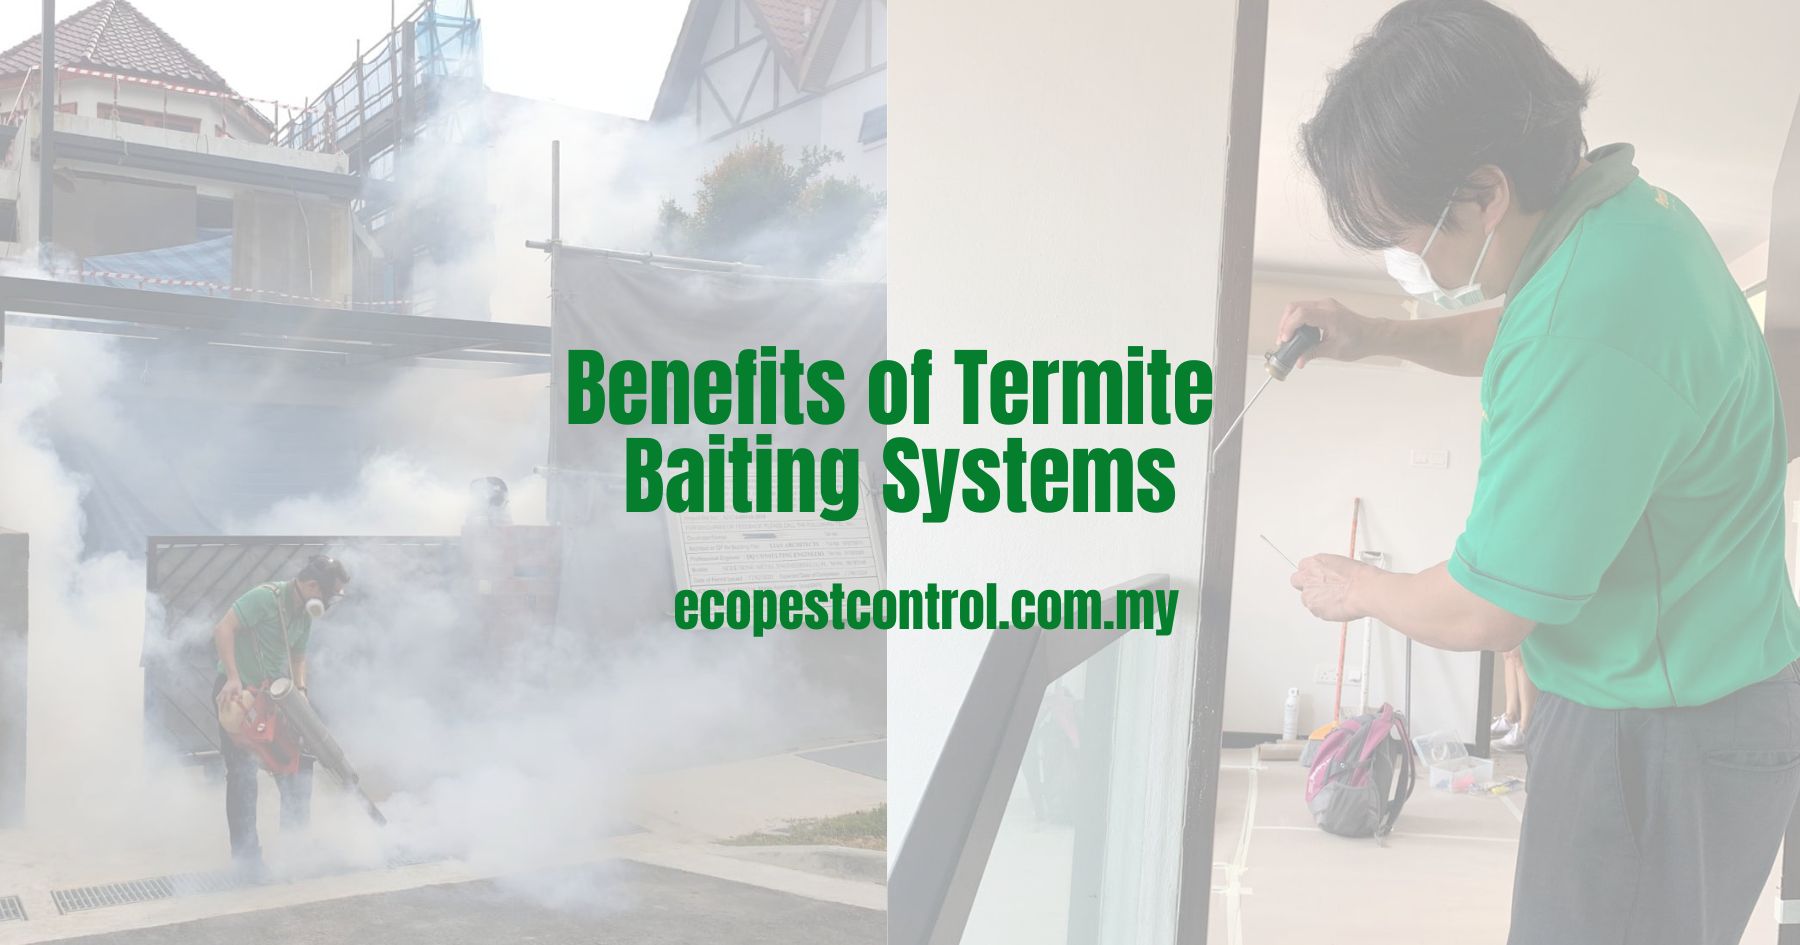 Benefits of Termite Baiting Systems